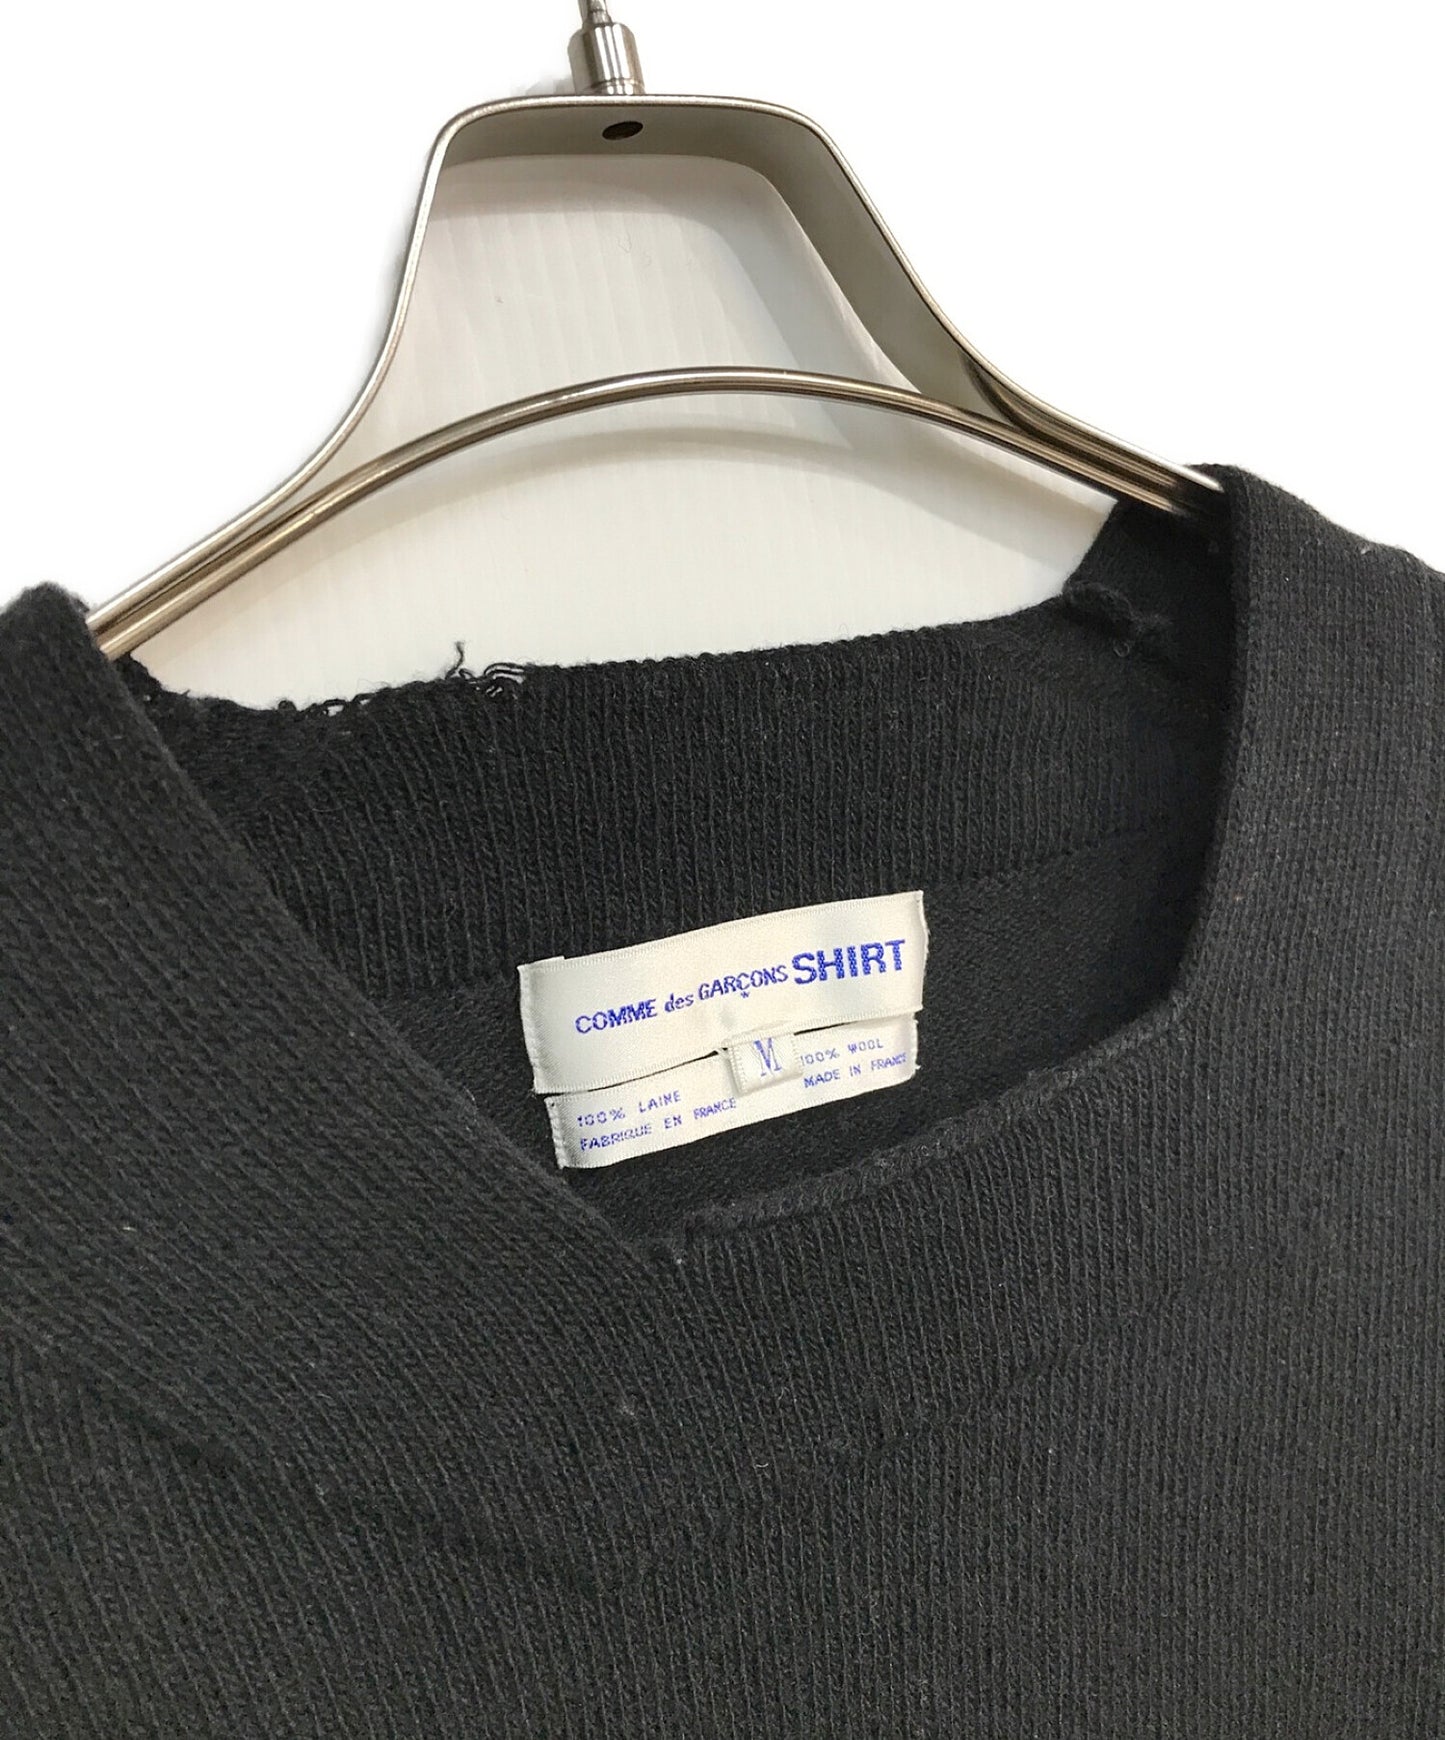 [Pre-owned] COMME des GARCONS SHIRT 90's Old Tag Made in France Square Collar Knit